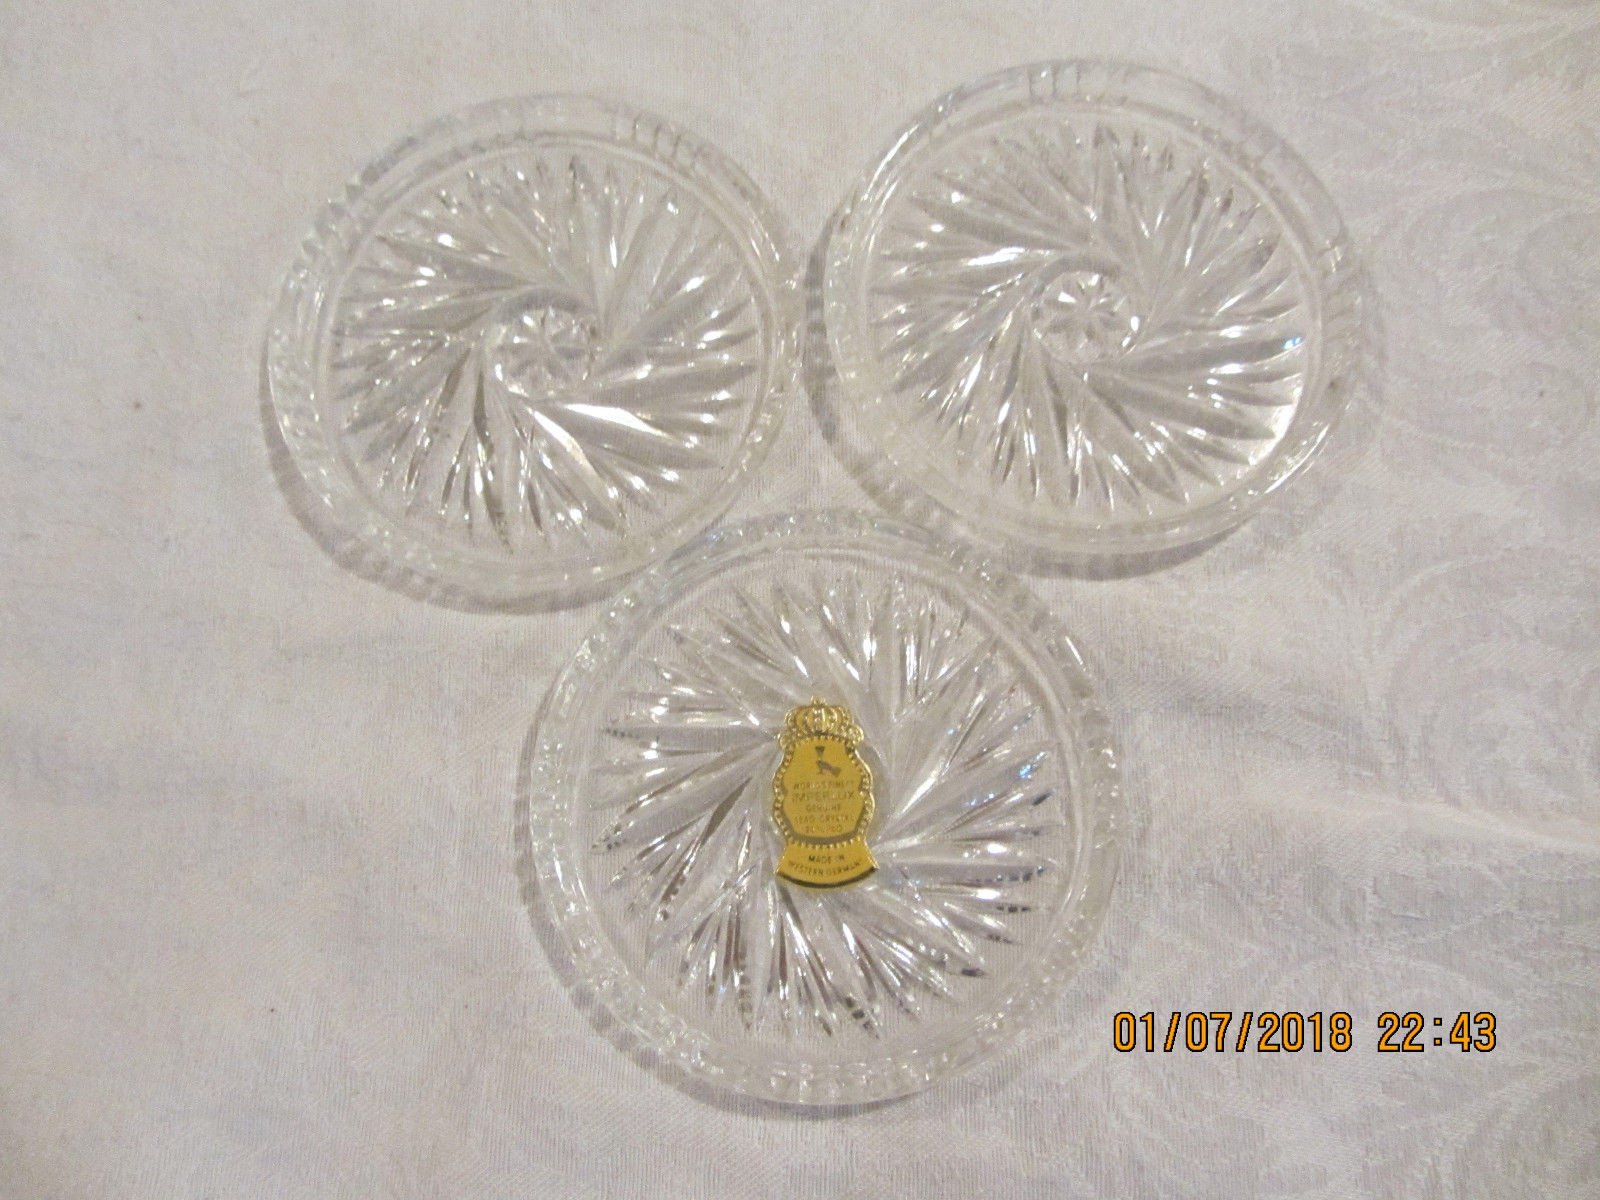 10 attractive Gorham Lady Anne Crystal Bud Vase 2024 free download gorham lady anne crystal bud vase of vintage imperlux lead crystal coasters set of 3 20 00 picclick with regard to 1 of 3only 1 available